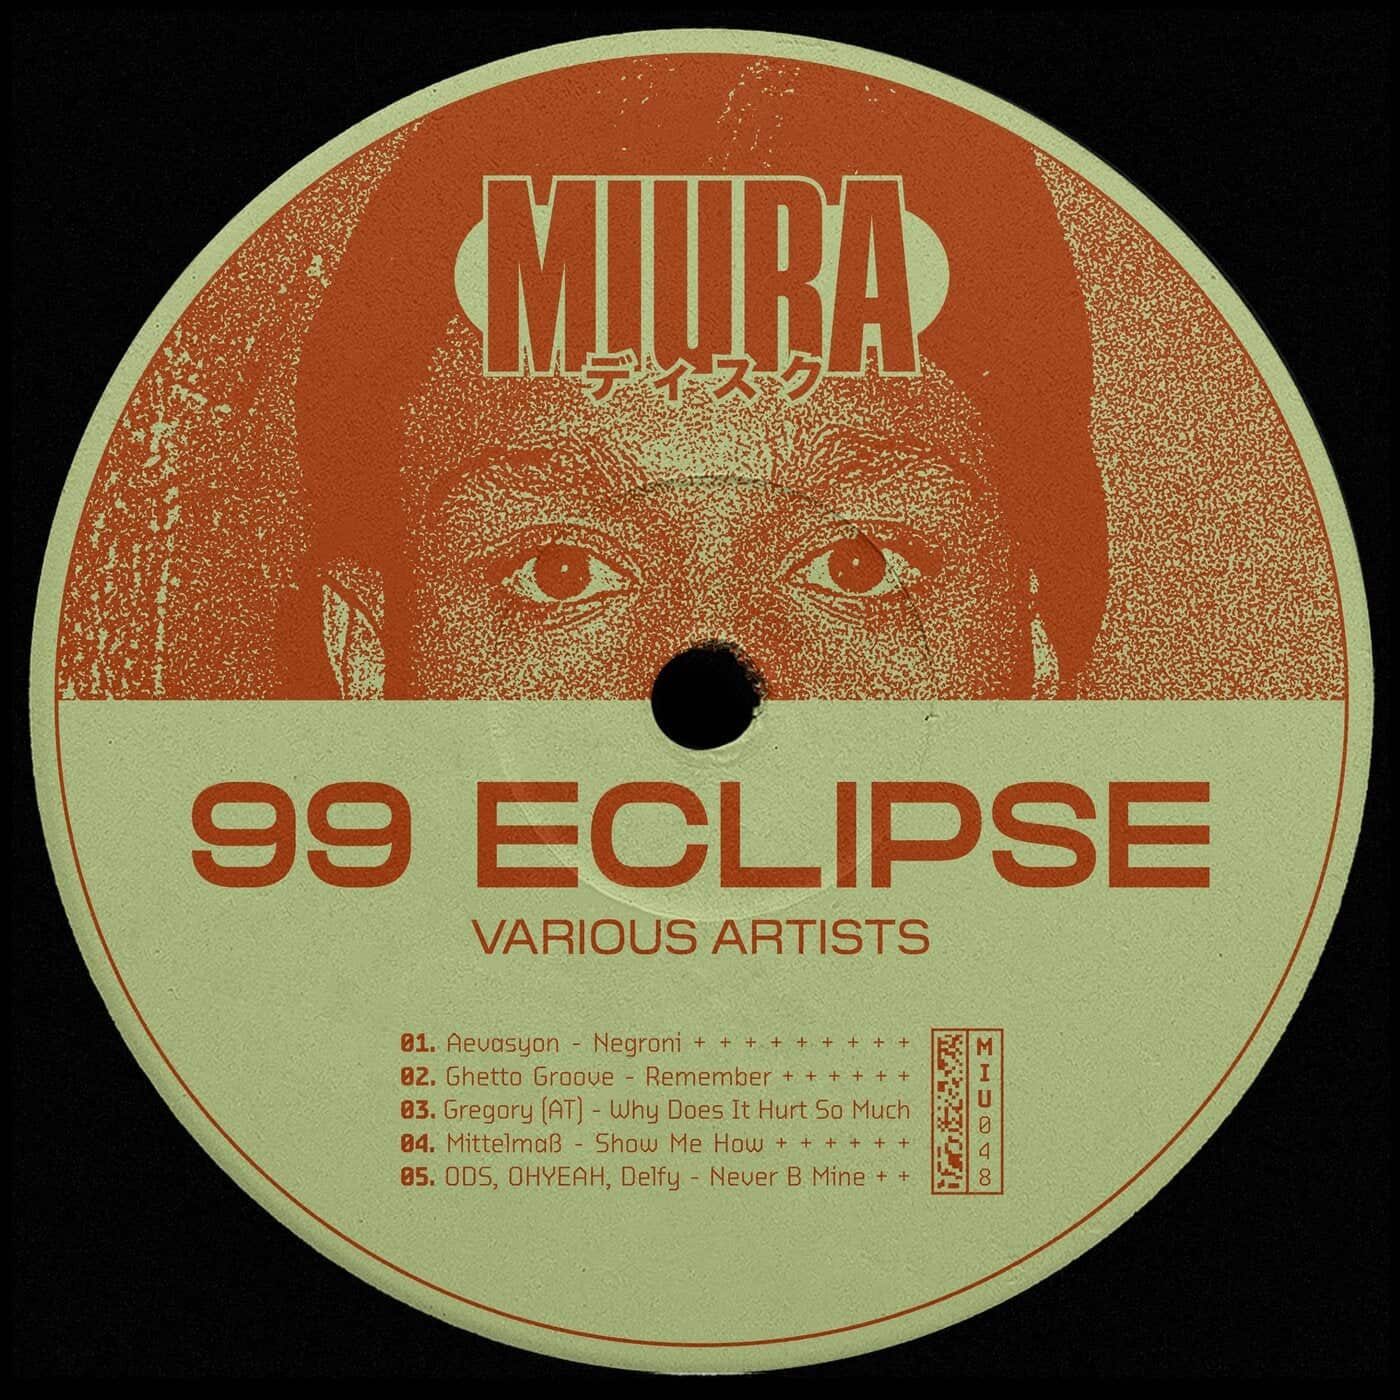 image cover: Aevasyon, Ghetto Groove, Gregory (AT), Mittelmaß, OHYEAH, Orbital Drum System, Delfy - 99 Eclipse / MIU048